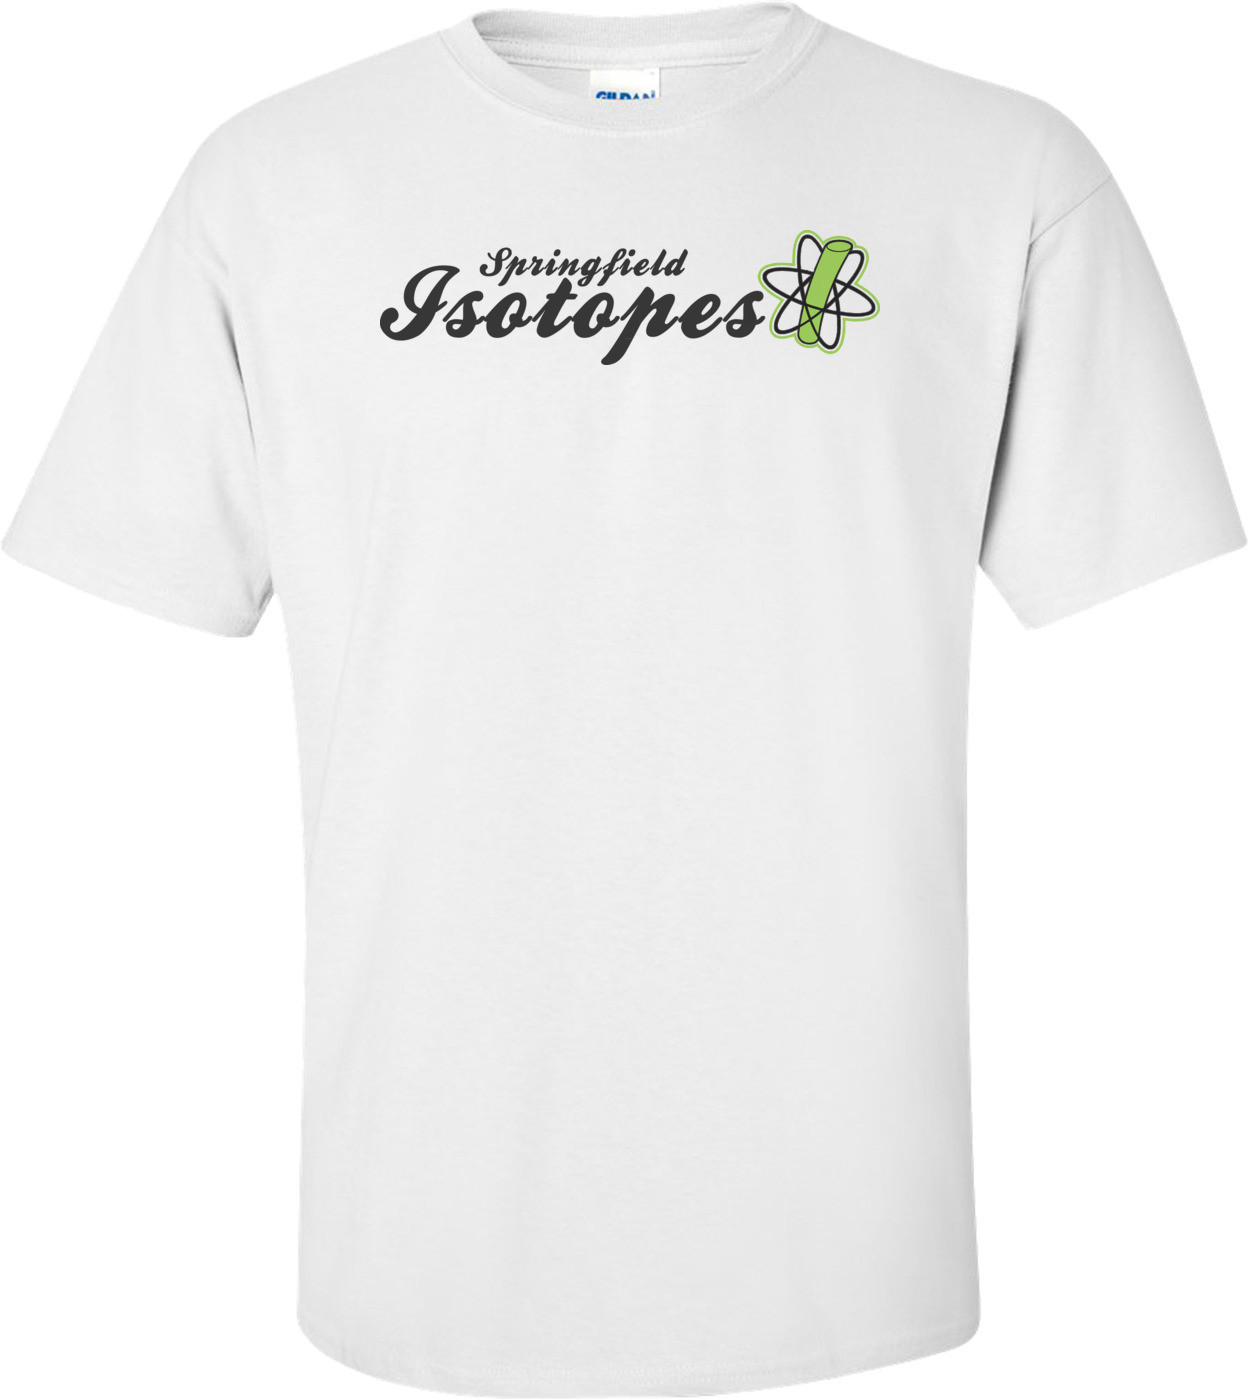 Springfield Isotopes - The Simpsons T-shirt